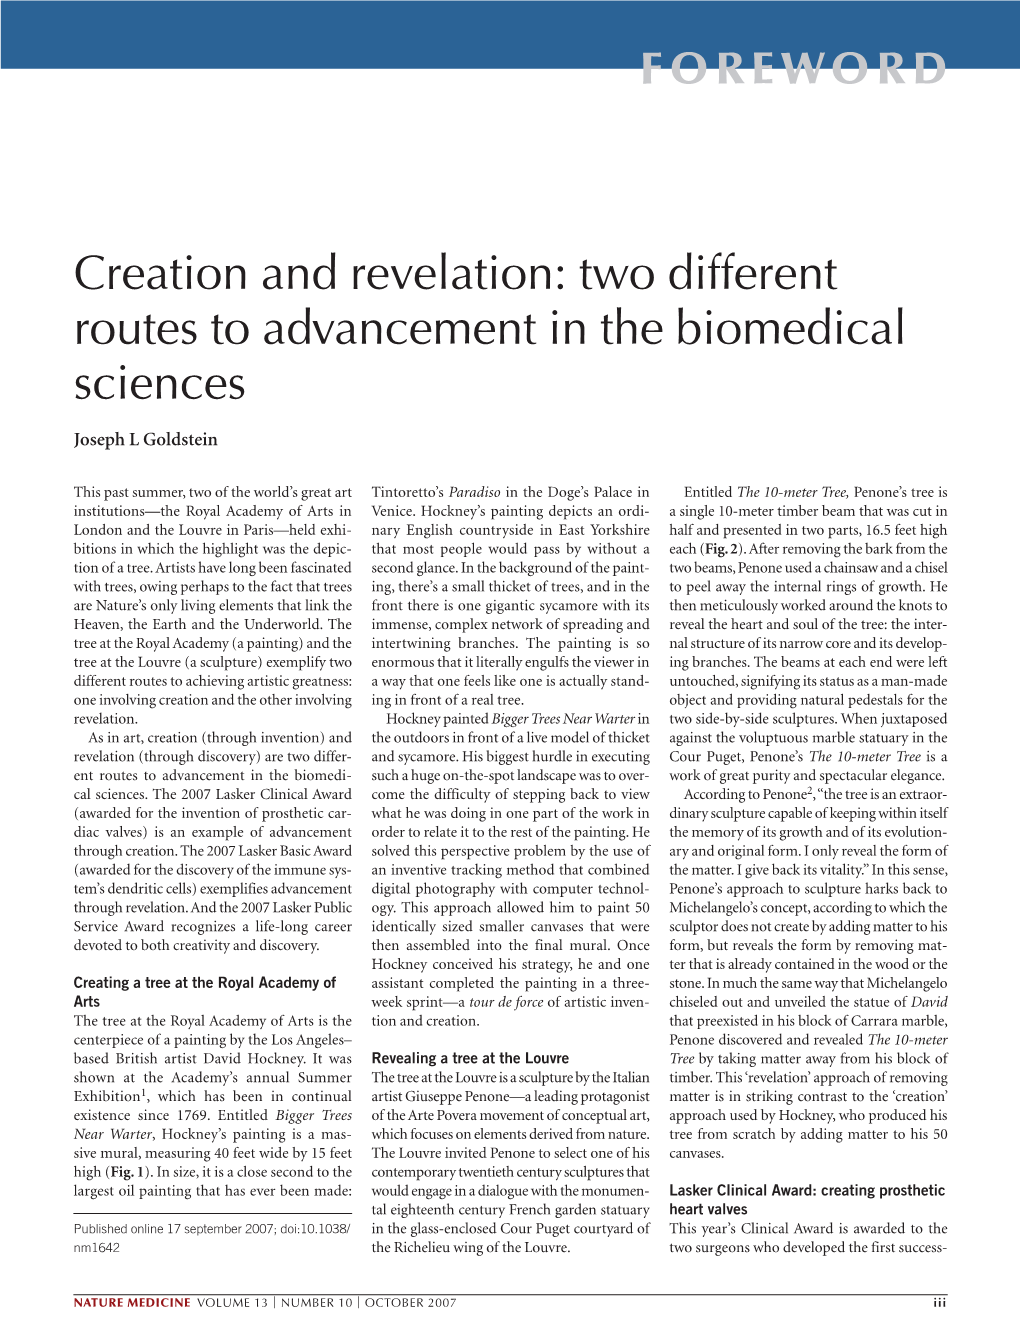 Two Different Routes to Advancement in the Biomedical Sciences